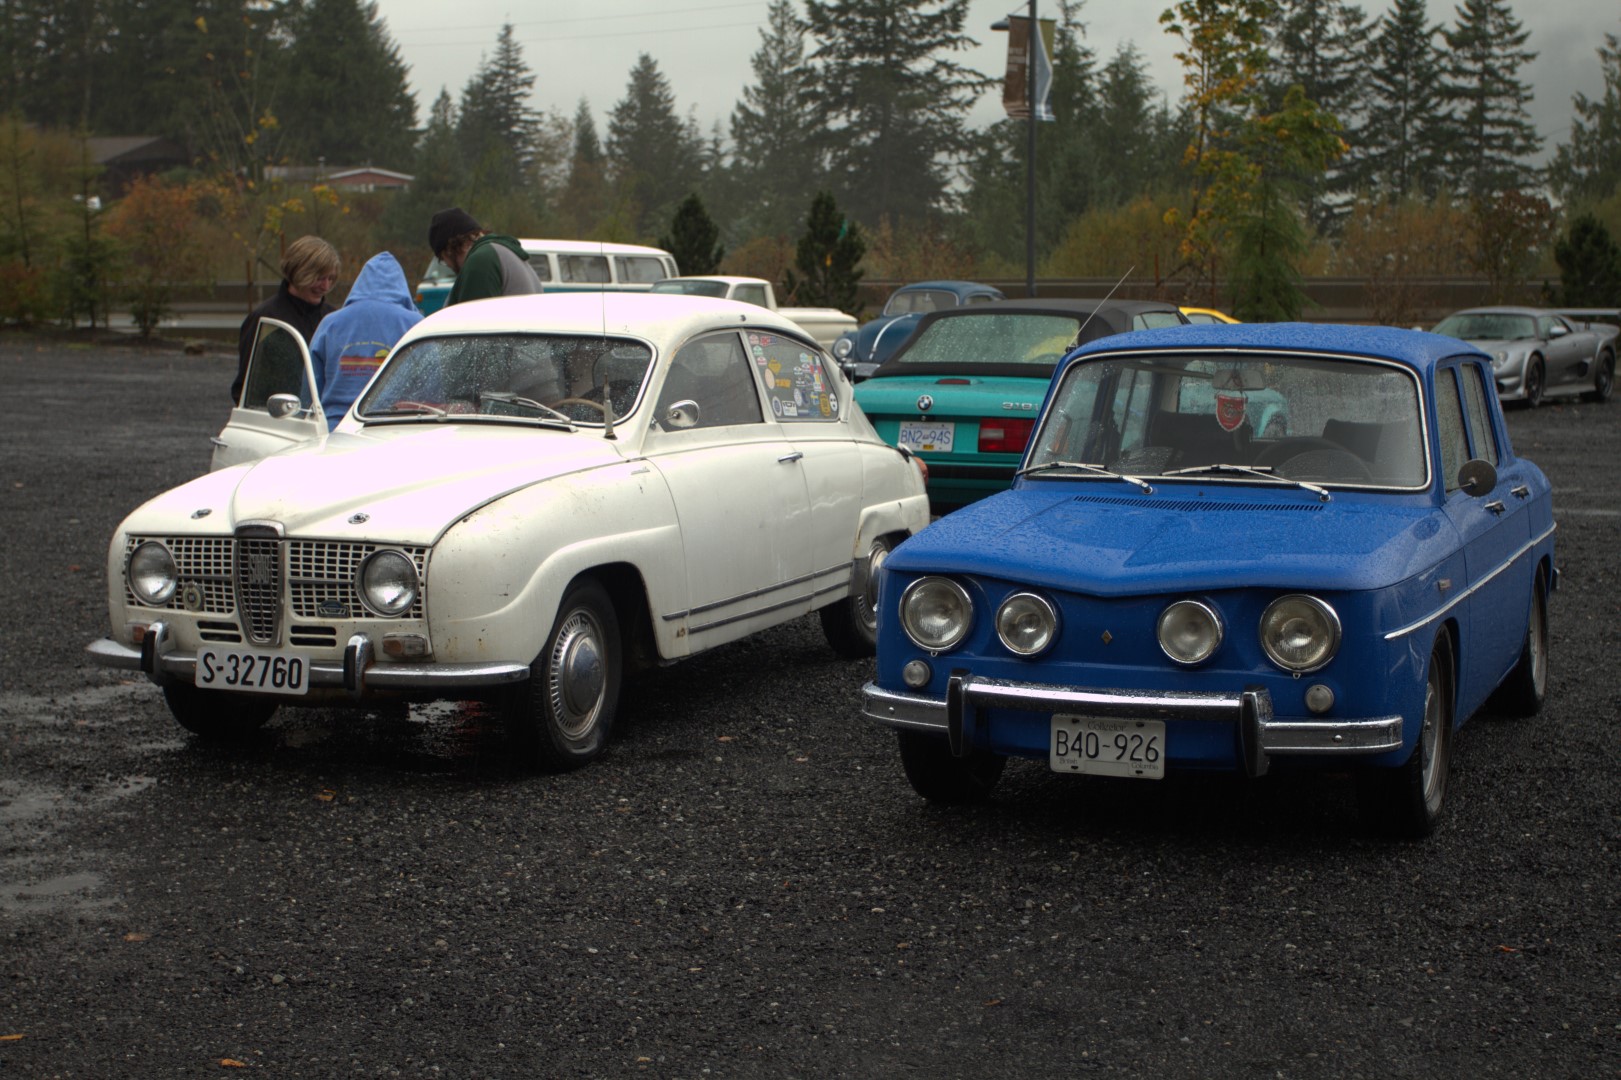 Rear engine/ rear drive Gordini next to the front engine/front drive Saab 94(??? I think). Polar opposites